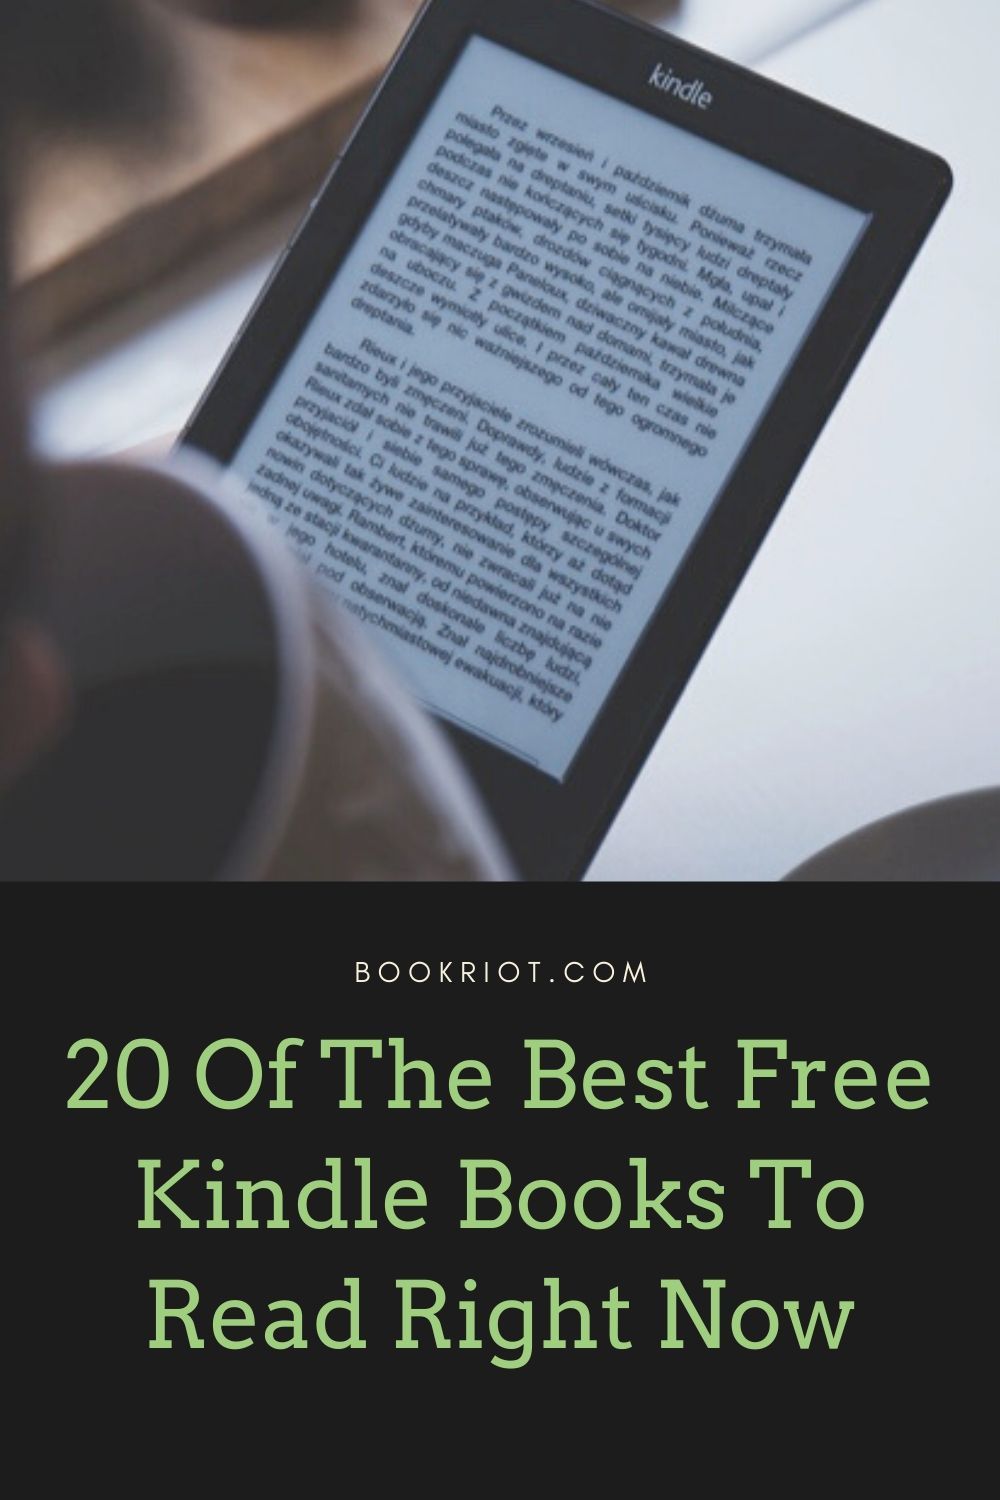 20 Of The Best Free Kindle Books You Can Read In Isolation Book Riot